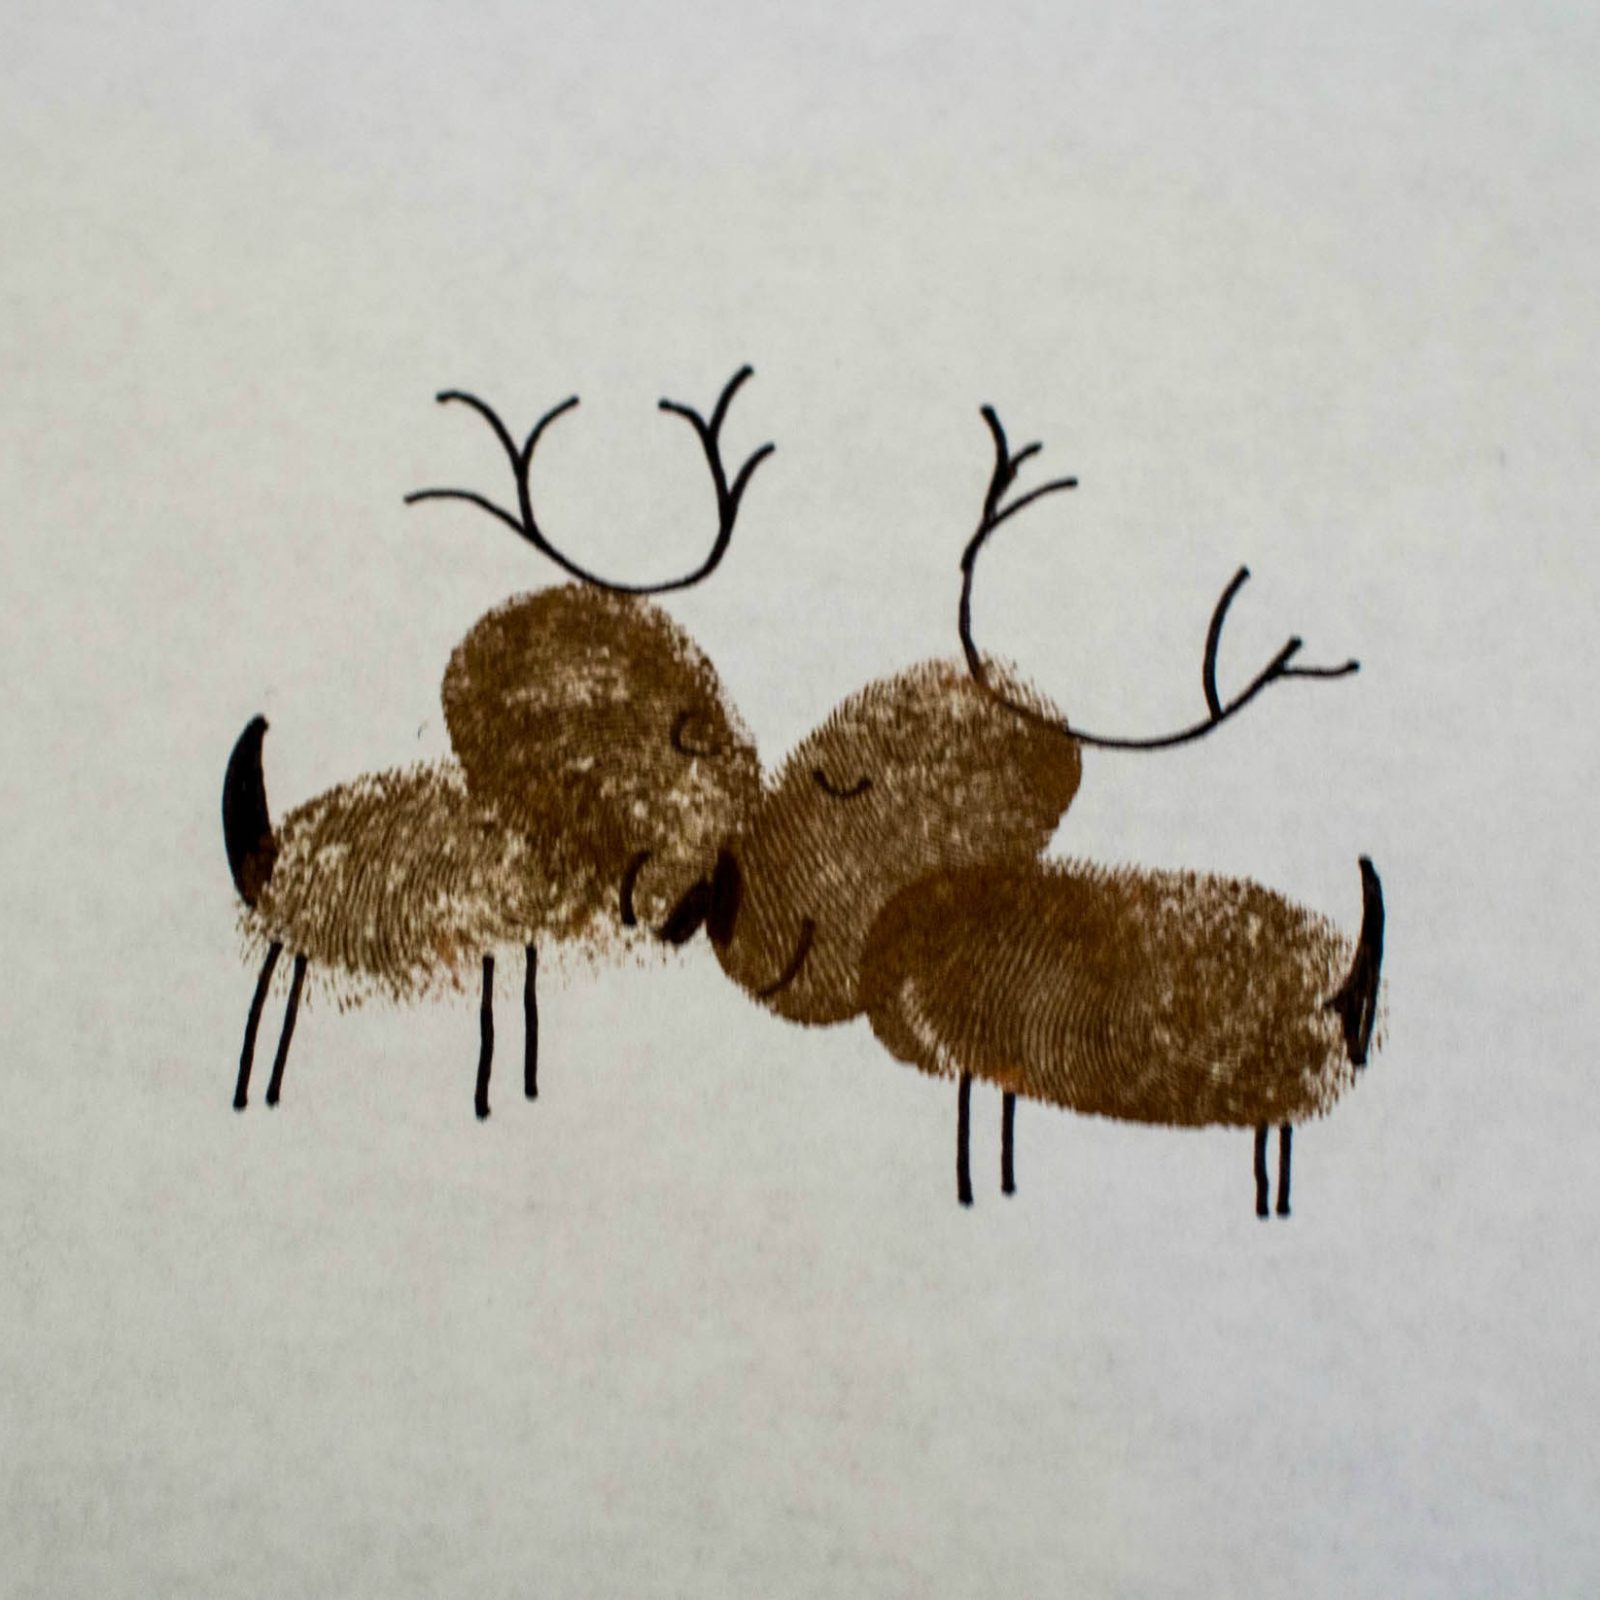 Two reindeer are kissing on a piece of paper.